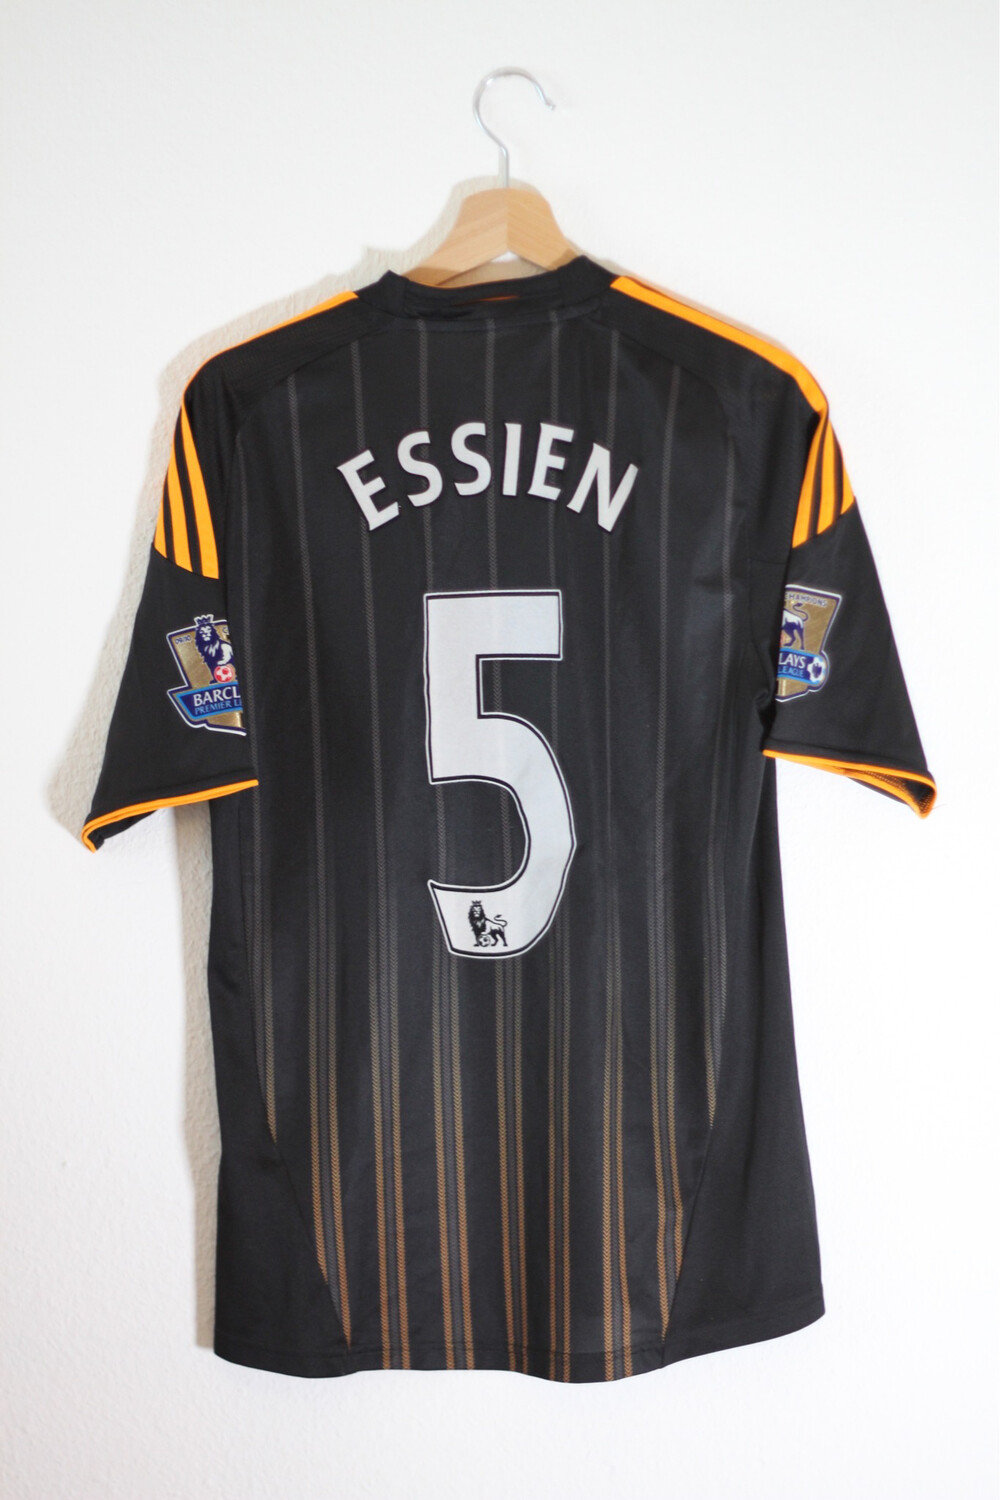 Maillot Chelsea 2010/11 Away #5 Essien